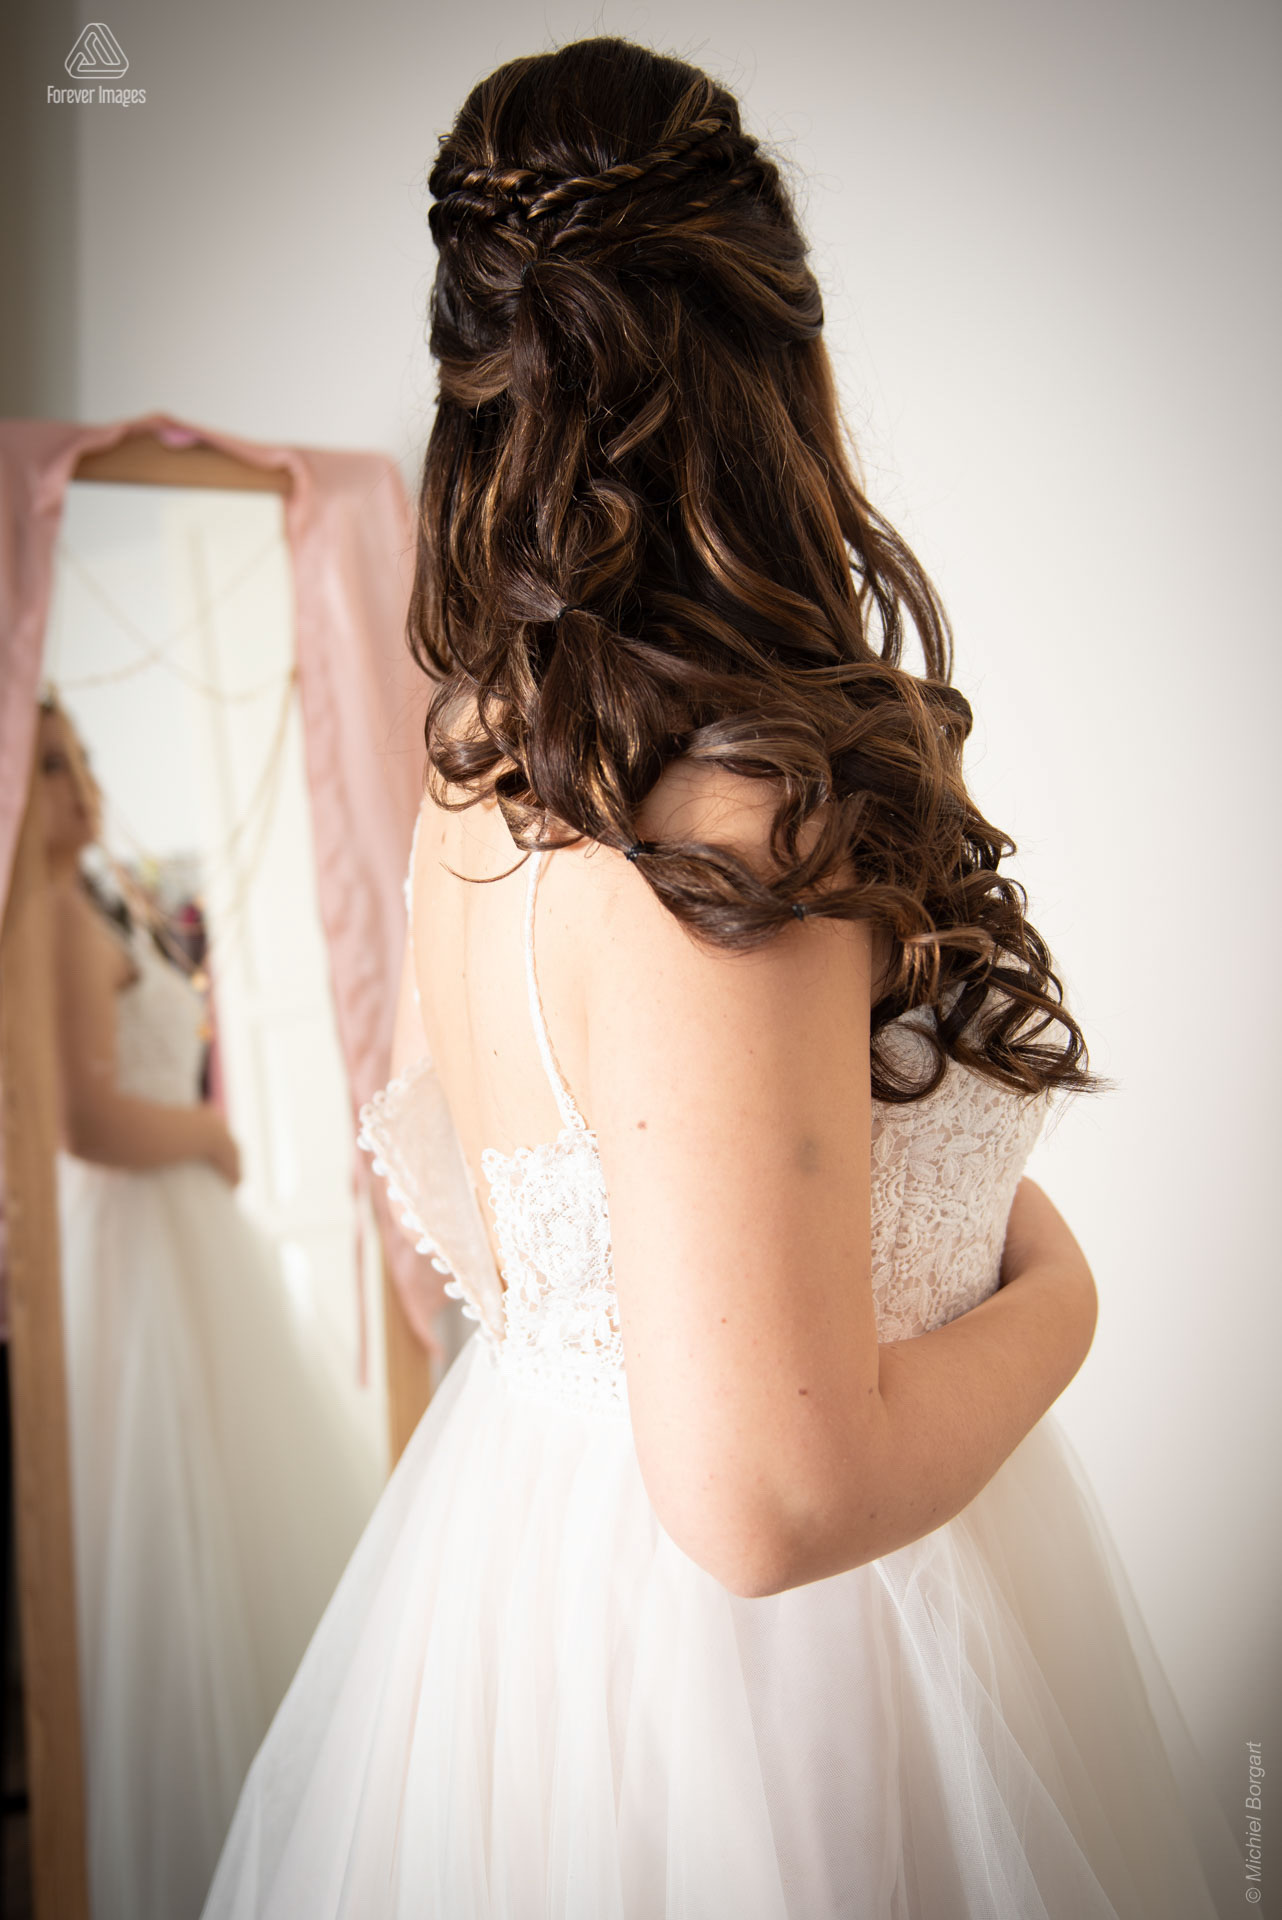 Wedding photo putting on wedding dress in front of mirror | Wedding Photographer Michiel Borgart - Forever Images.